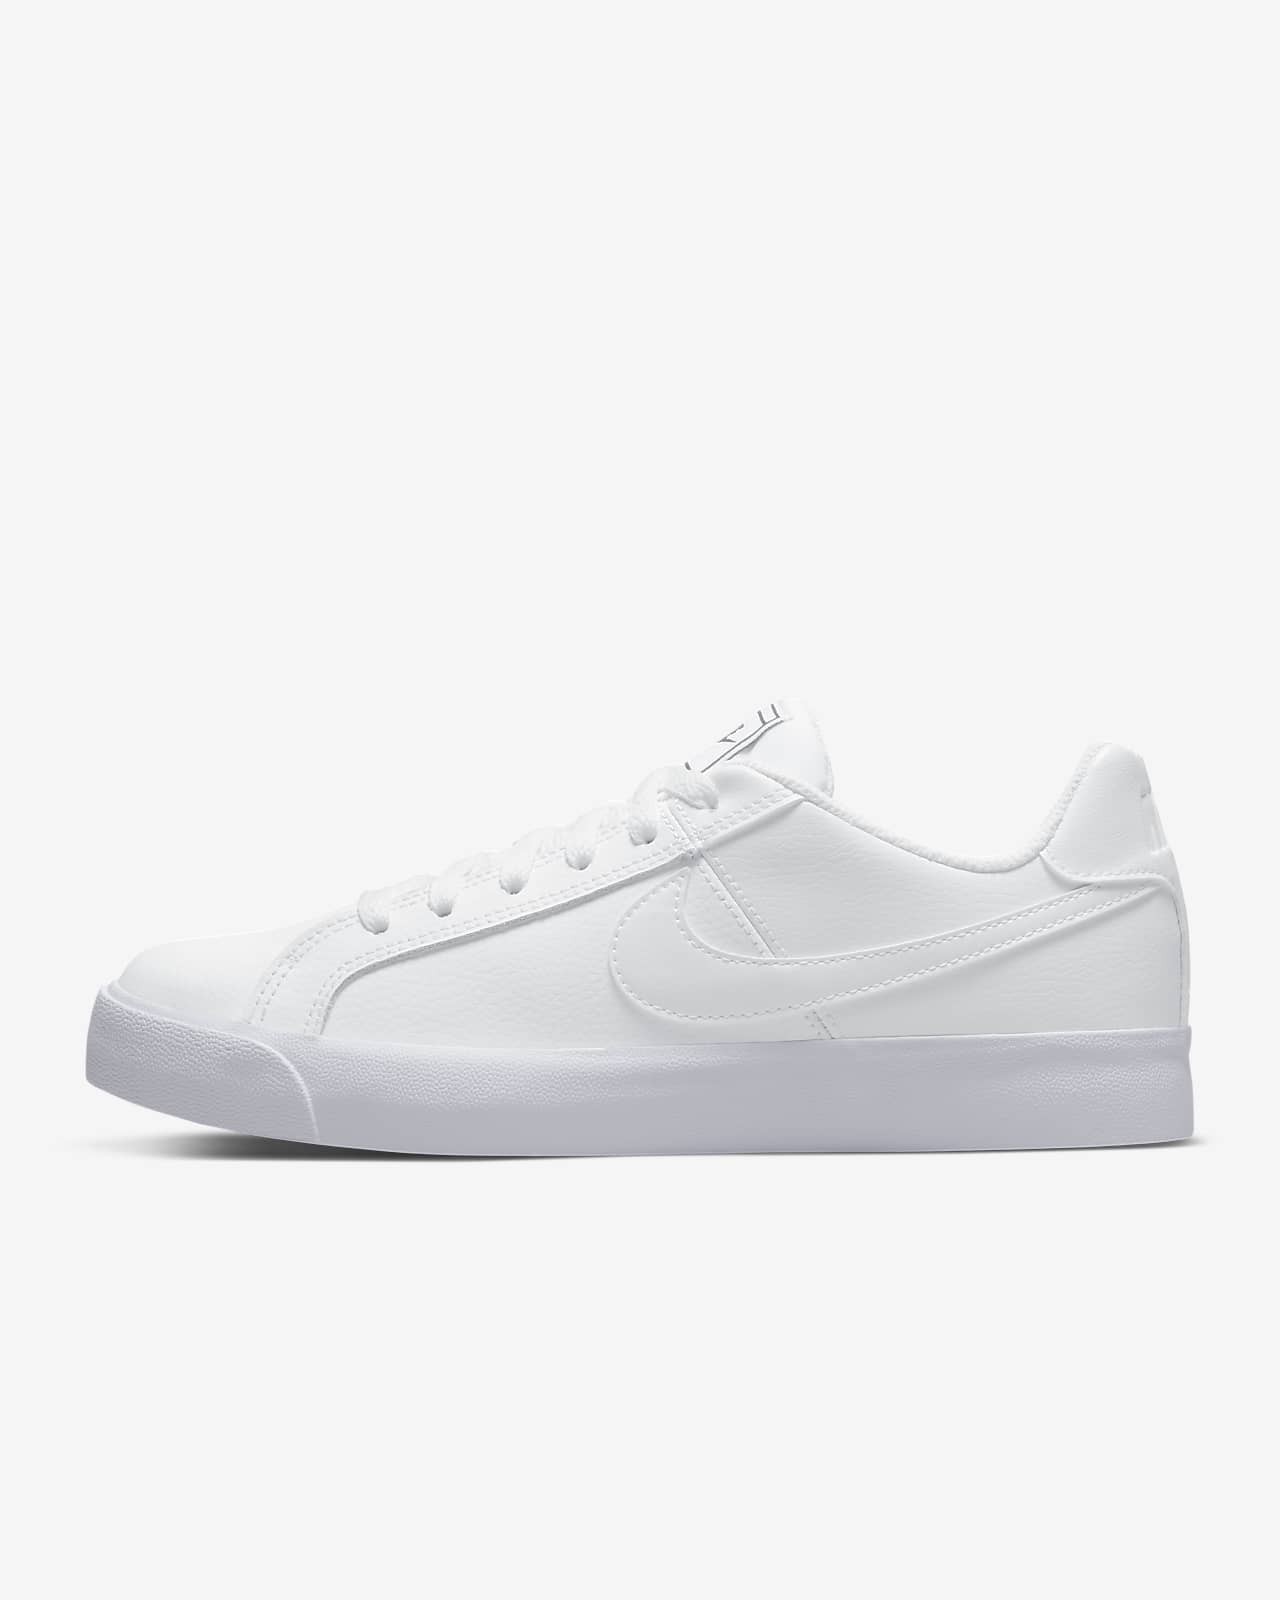 Women's Nike Court Royale AC 'White' $39.97 Free Shipping - Sneaker Steal